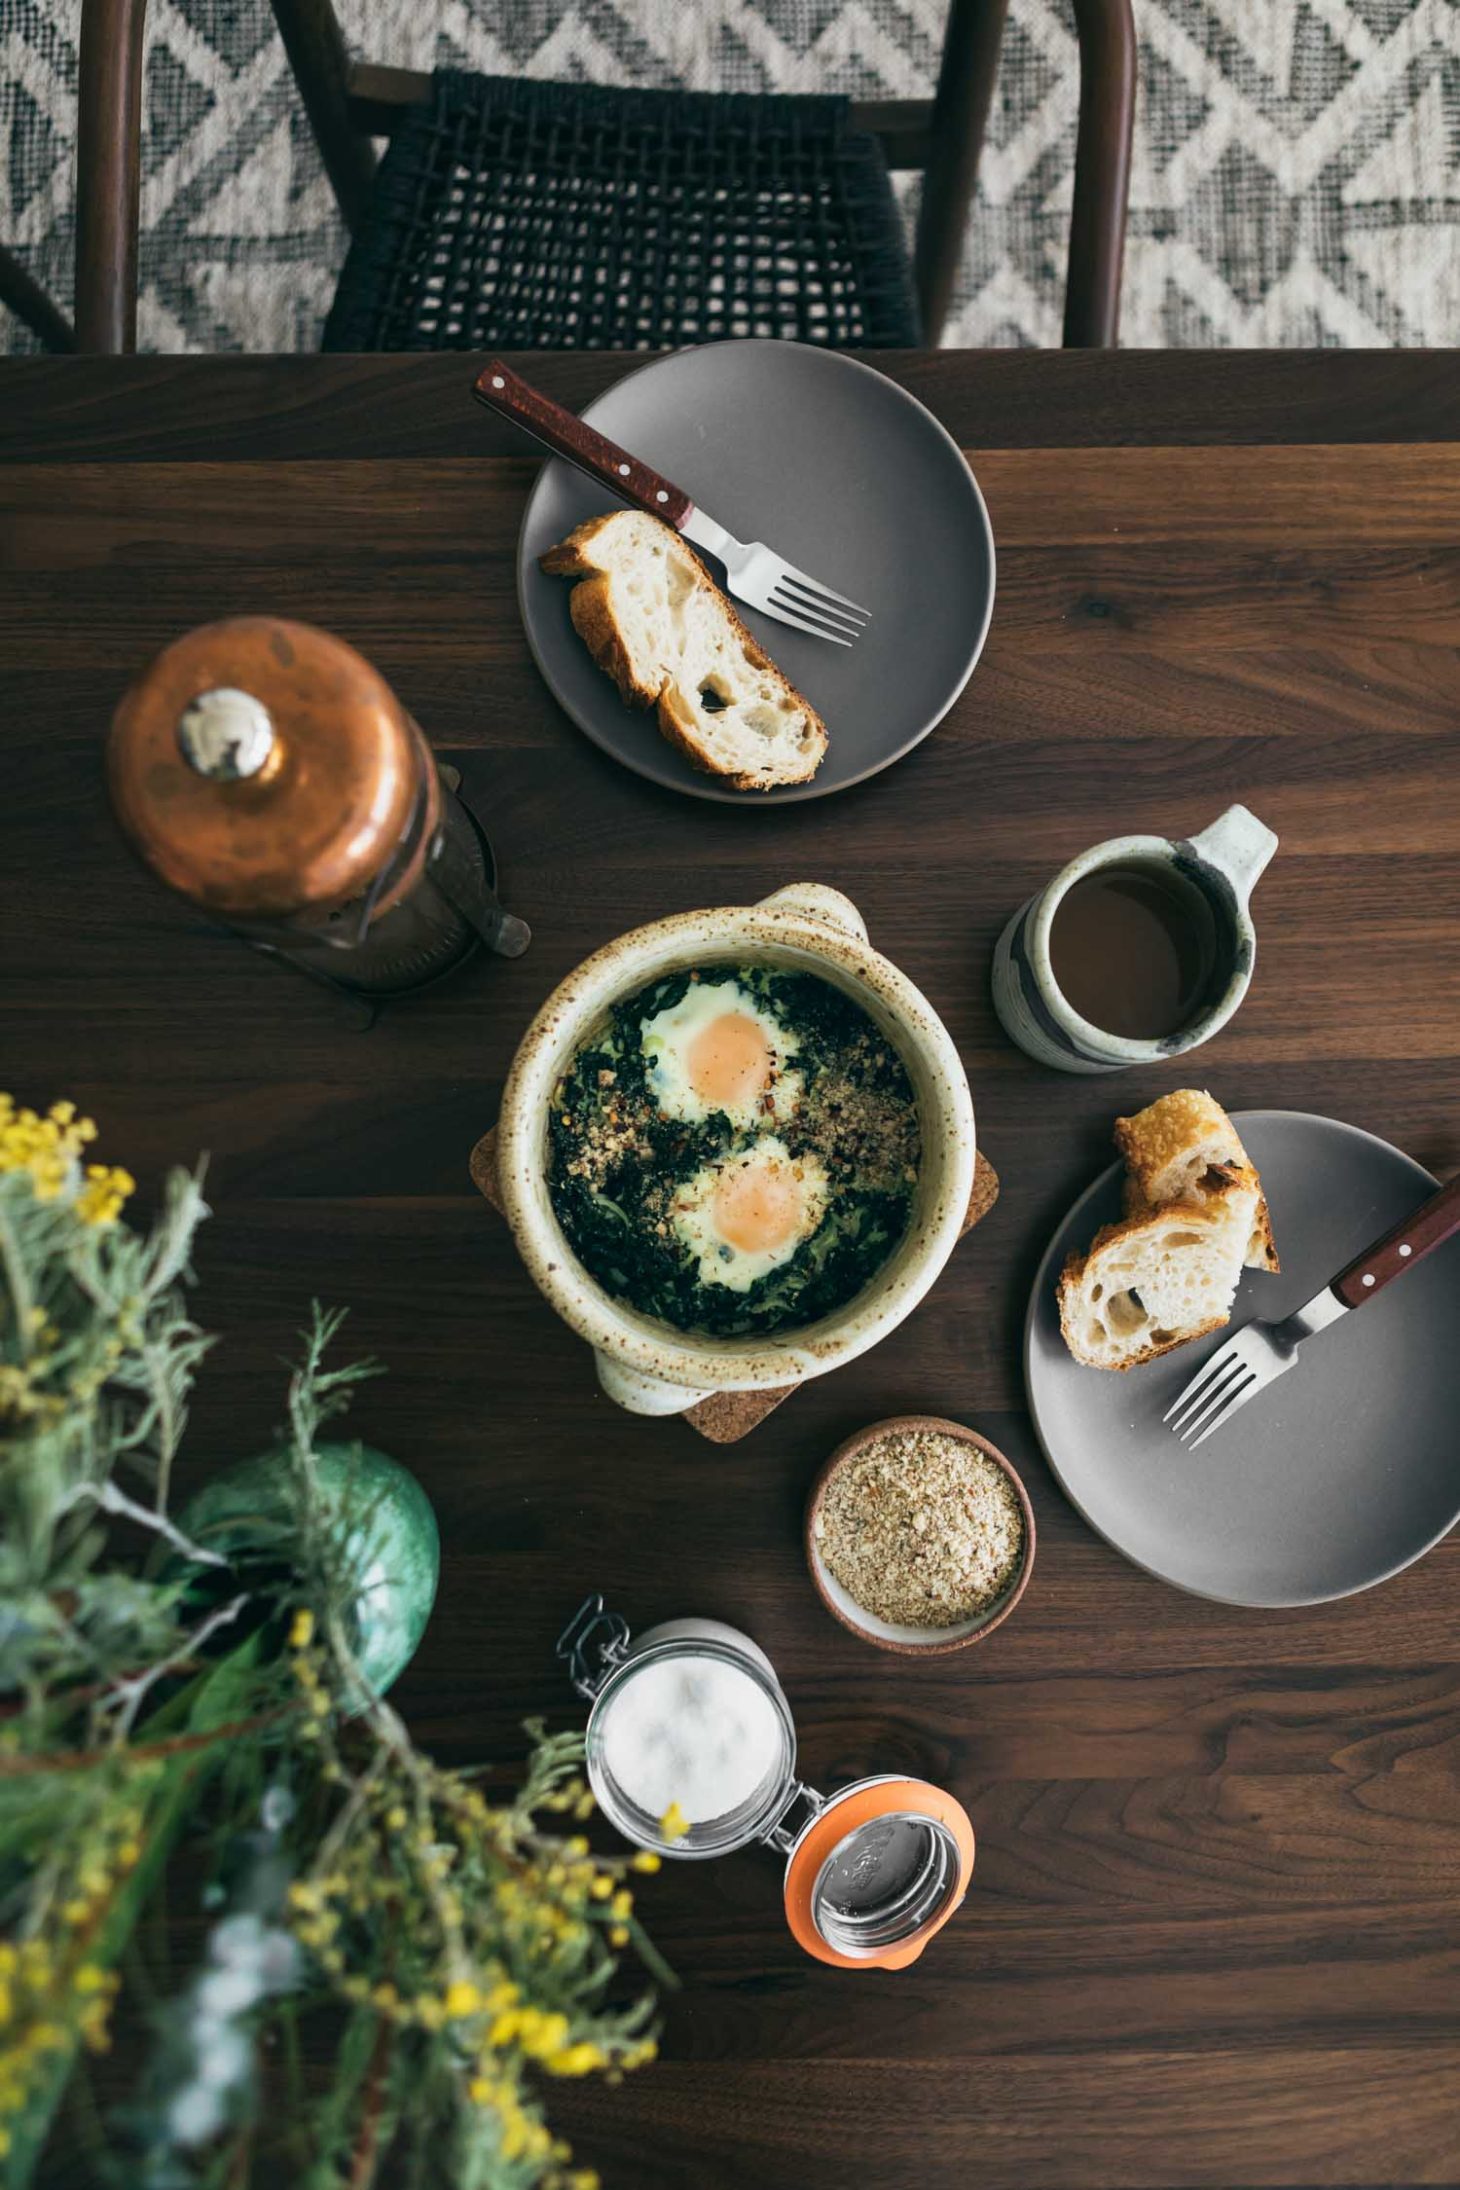 Kale Baked Eggs with Dukkah with Toast | Naturally Ella